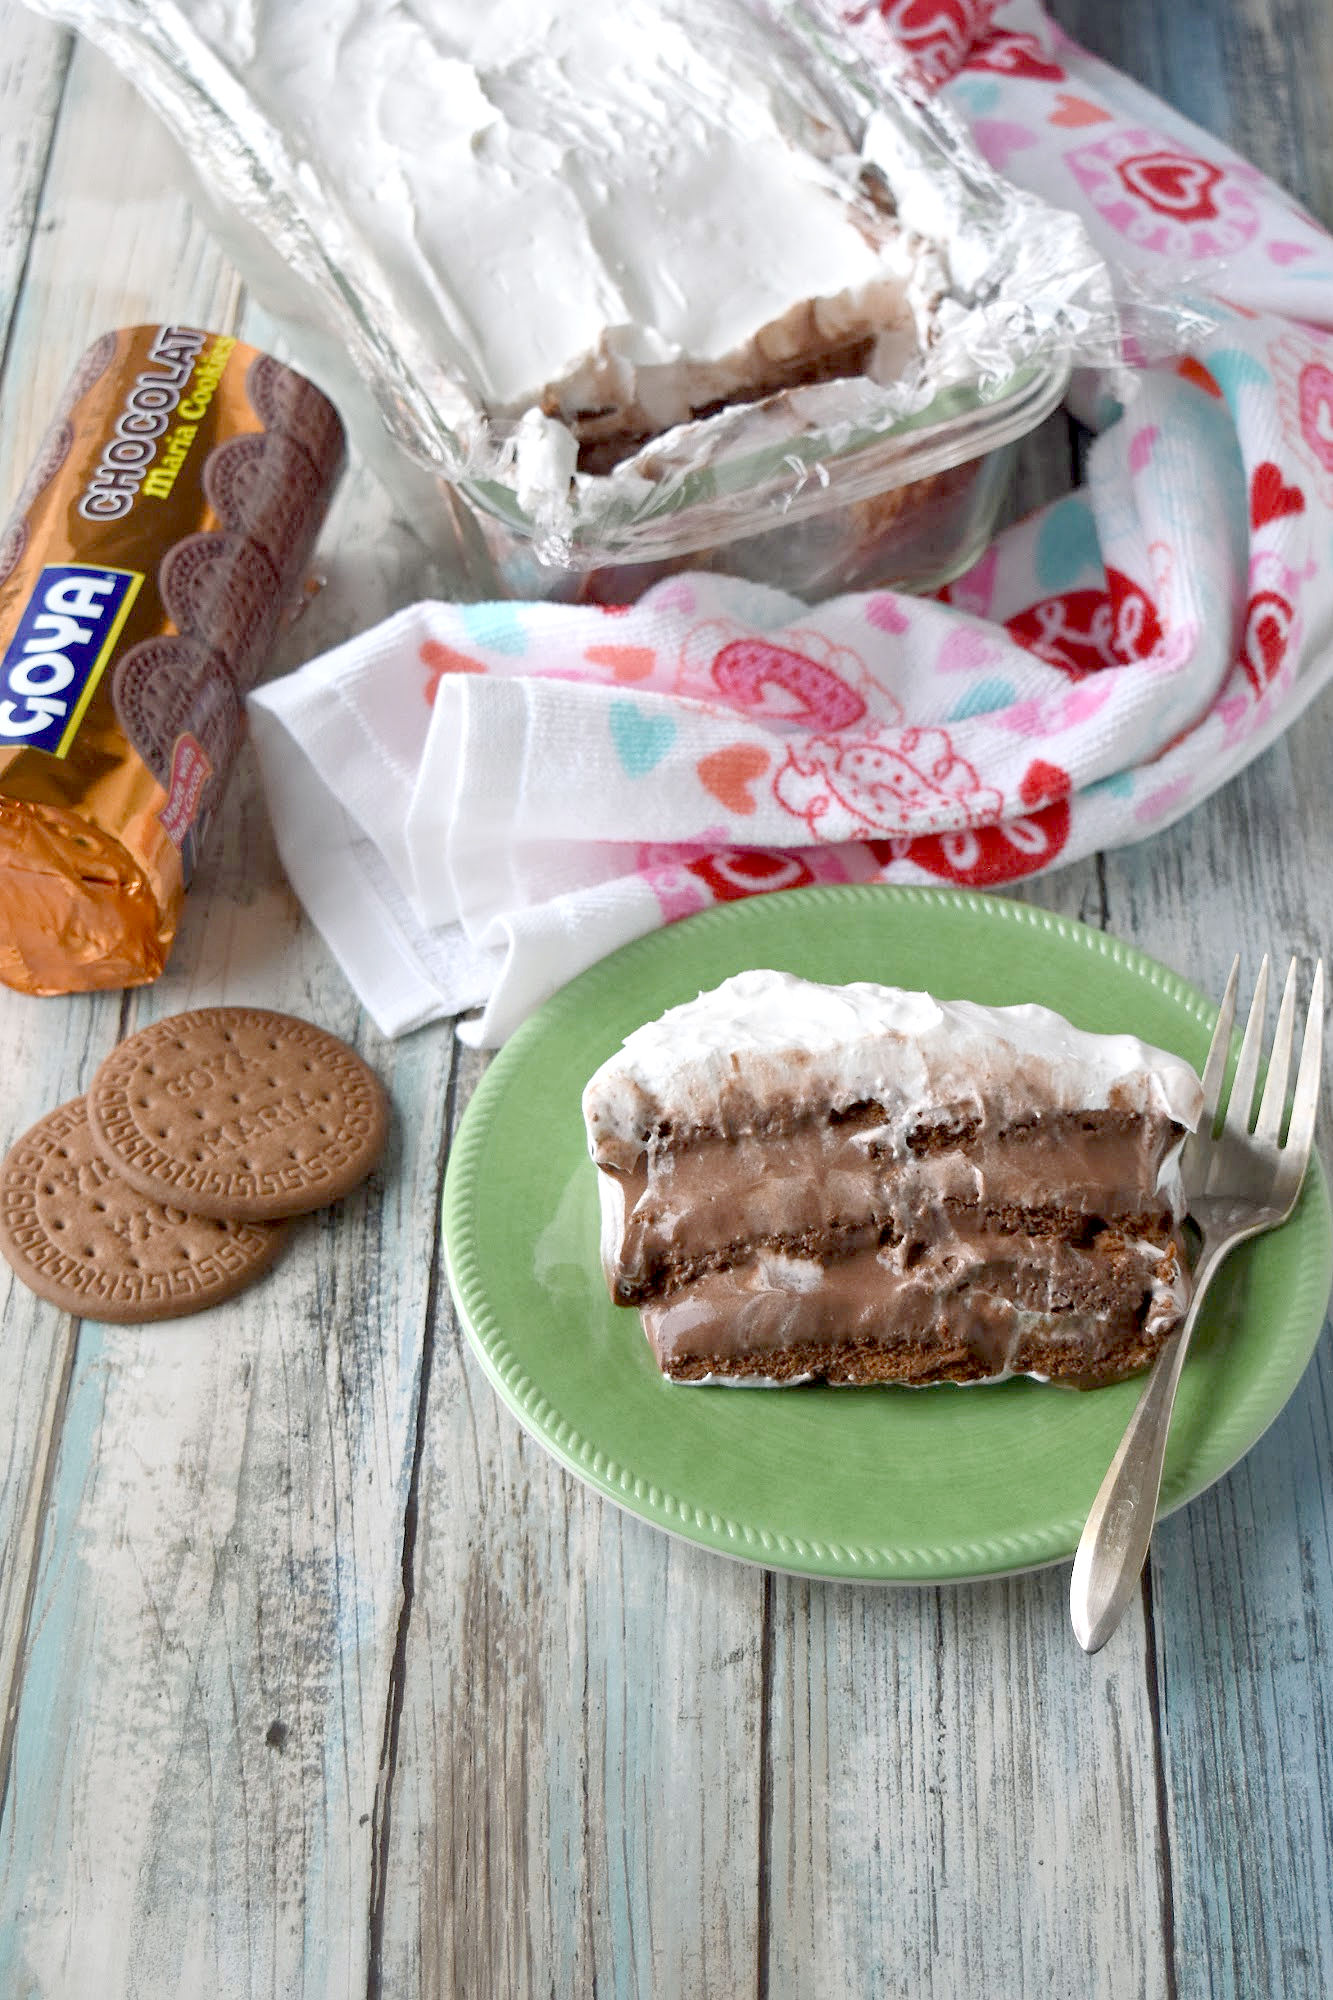 Icebox Mocha Cake is easy to assemble with simple ingredients. The chocolate cookies absorb all the flavors of the pudding and make for rich layers. #ChocolateWeek